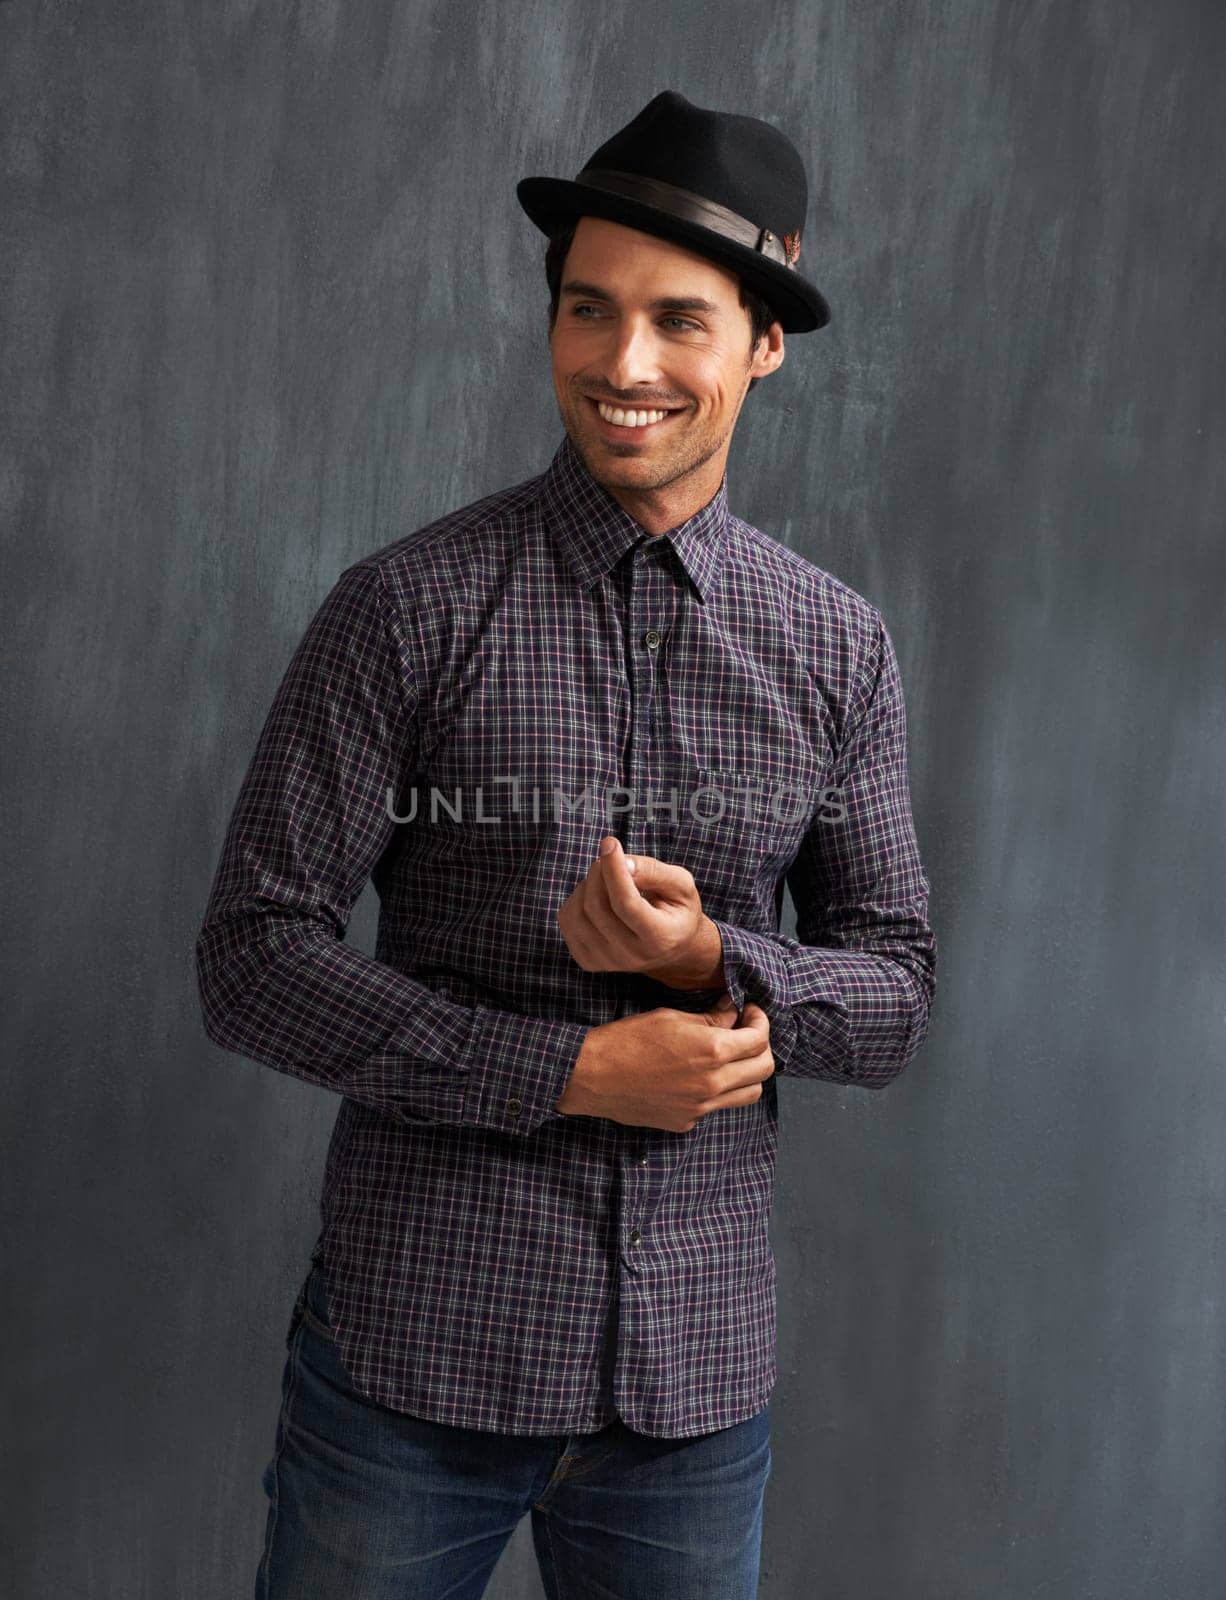 Fashion, happy and man on gray background with confidence in trendy style, clothes and casual outfit. Smile, handsome and face of person on texture wall with accessory, pride and positive attitude.